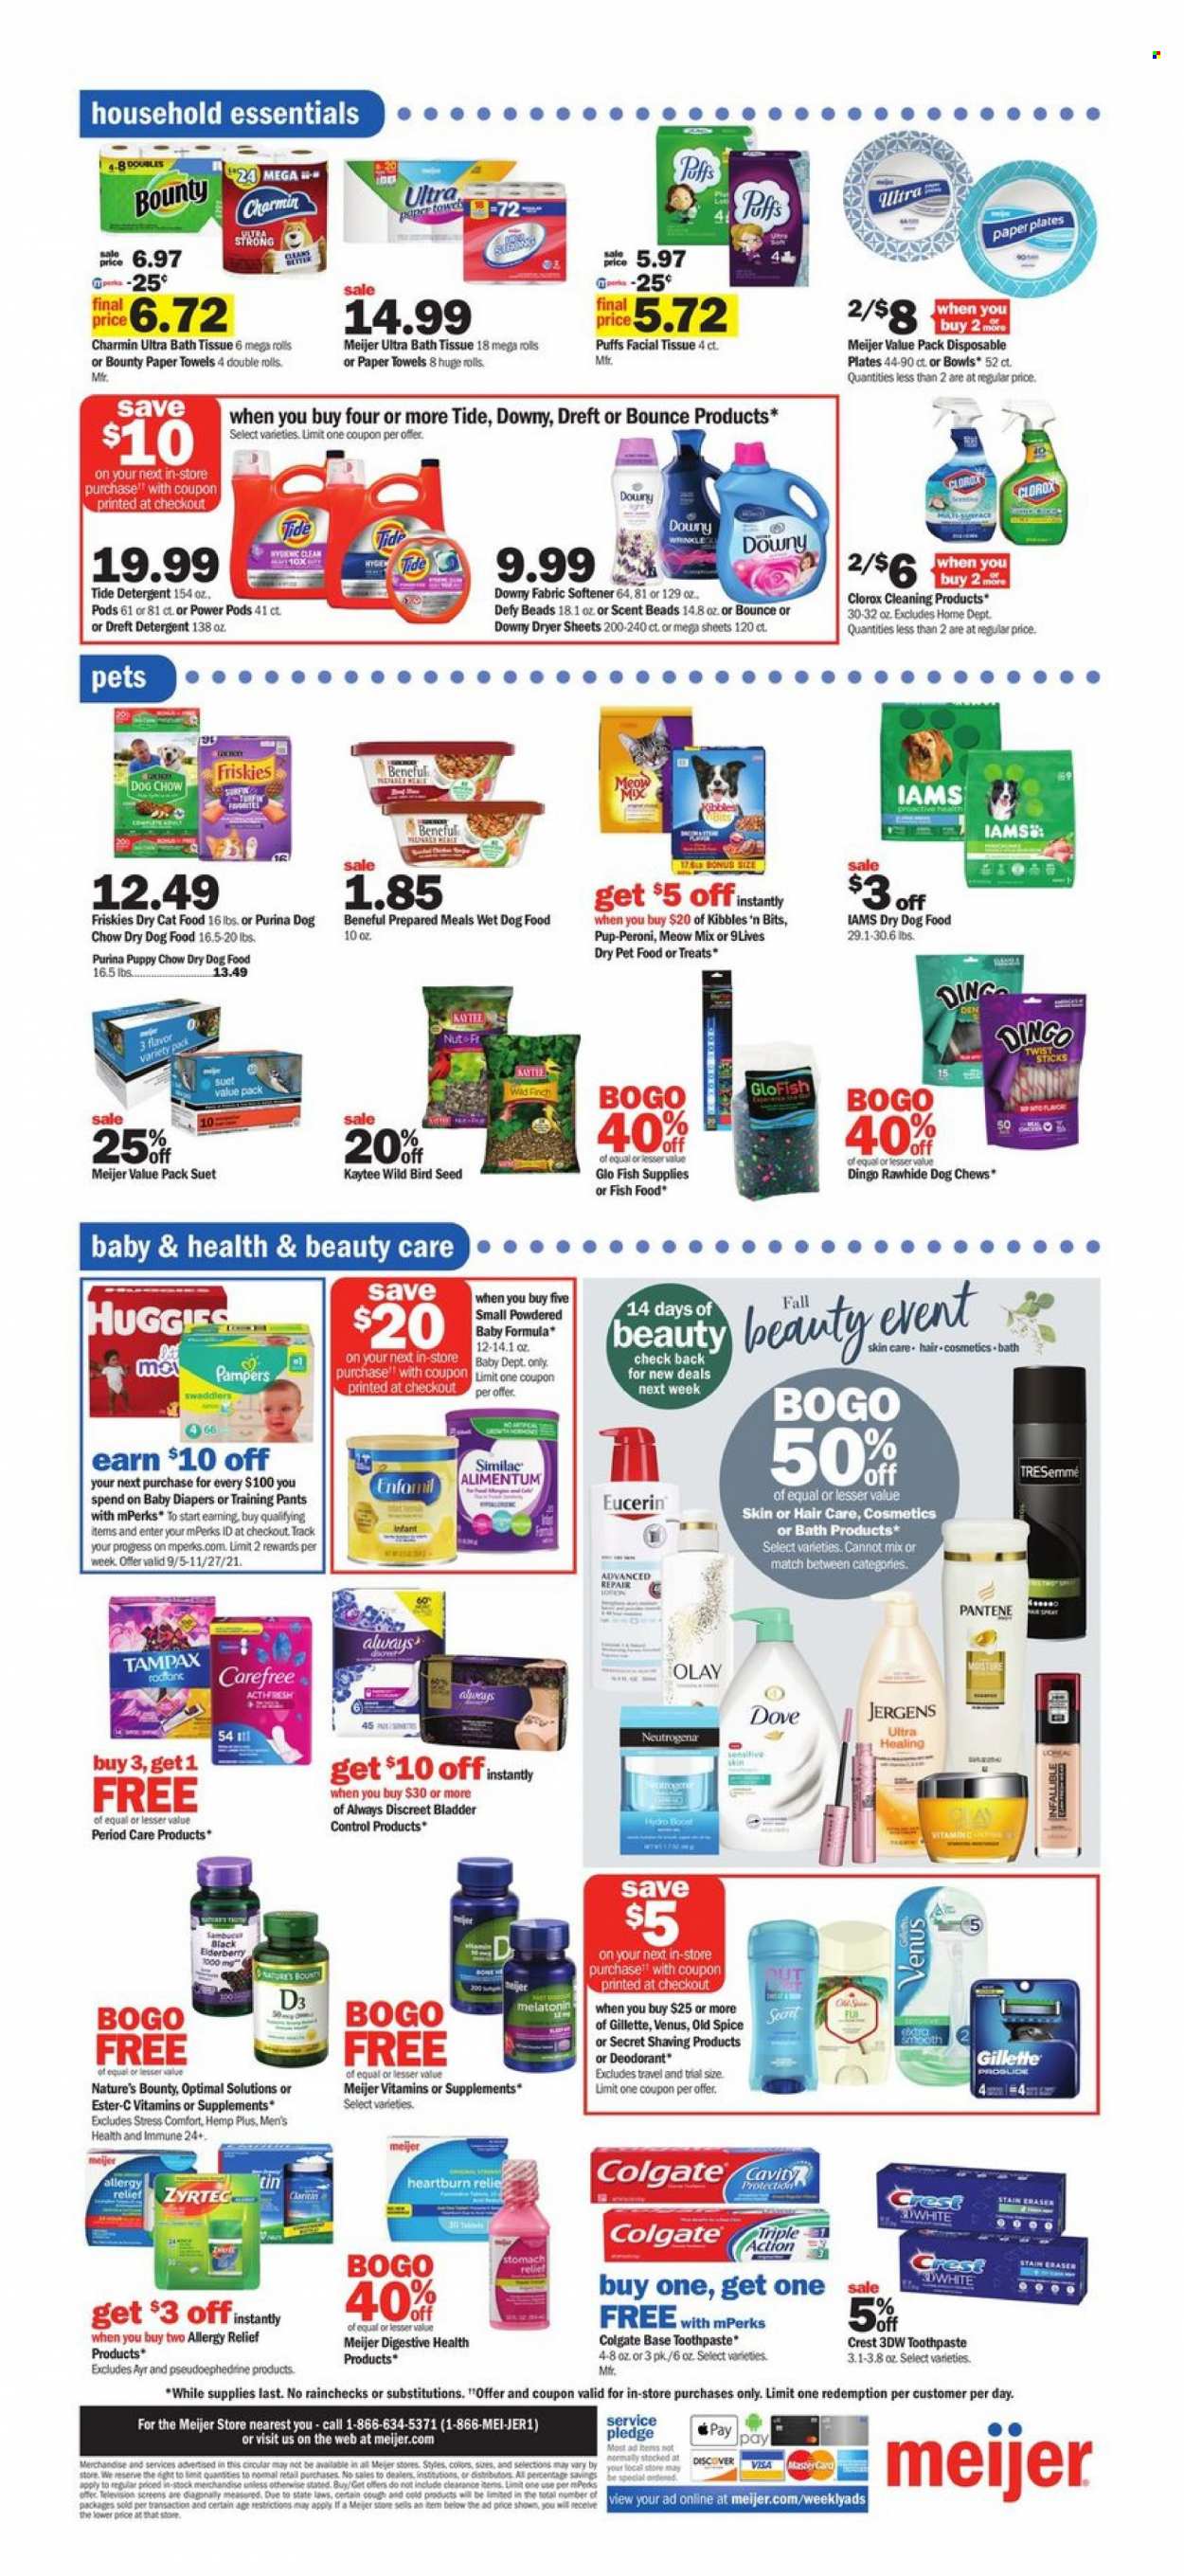 thumbnail - Meijer Flyer - 10/03/2021 - 10/09/2021 - Sales products - puffs, suet, malt, spice, Enfamil, Similac, Huggies, Pampers, pants, nappies, baby pants, bath tissue, kitchen towels, paper towels, Charmin, detergent, Clorox, Pledge, Tide, fabric softener, dryer sheets, XTRA, Downy Laundry, Dove, Old Spice, Colgate, toothpaste, Crest, Tampax, Always Discreet, Carefree, Neutrogena, Olay, TRESemmé, Pantene, Eucerin, Jergens, anti-perspirant, deodorant, Gillette, Venus, plate, eraser, Kaytee, animal food, animal treats, bird food, cat food, dog food, Dog Chow, wet dog food, Purina, 9lives, dry dog food, dog chews, dry cat food, Pup-Peroni, Meow Mix, Friskies, Iams, fish food, Ester-c, Melatonin, Nature's Bounty, Zyrtec, vitamin D3, allergy relief. Page 13.